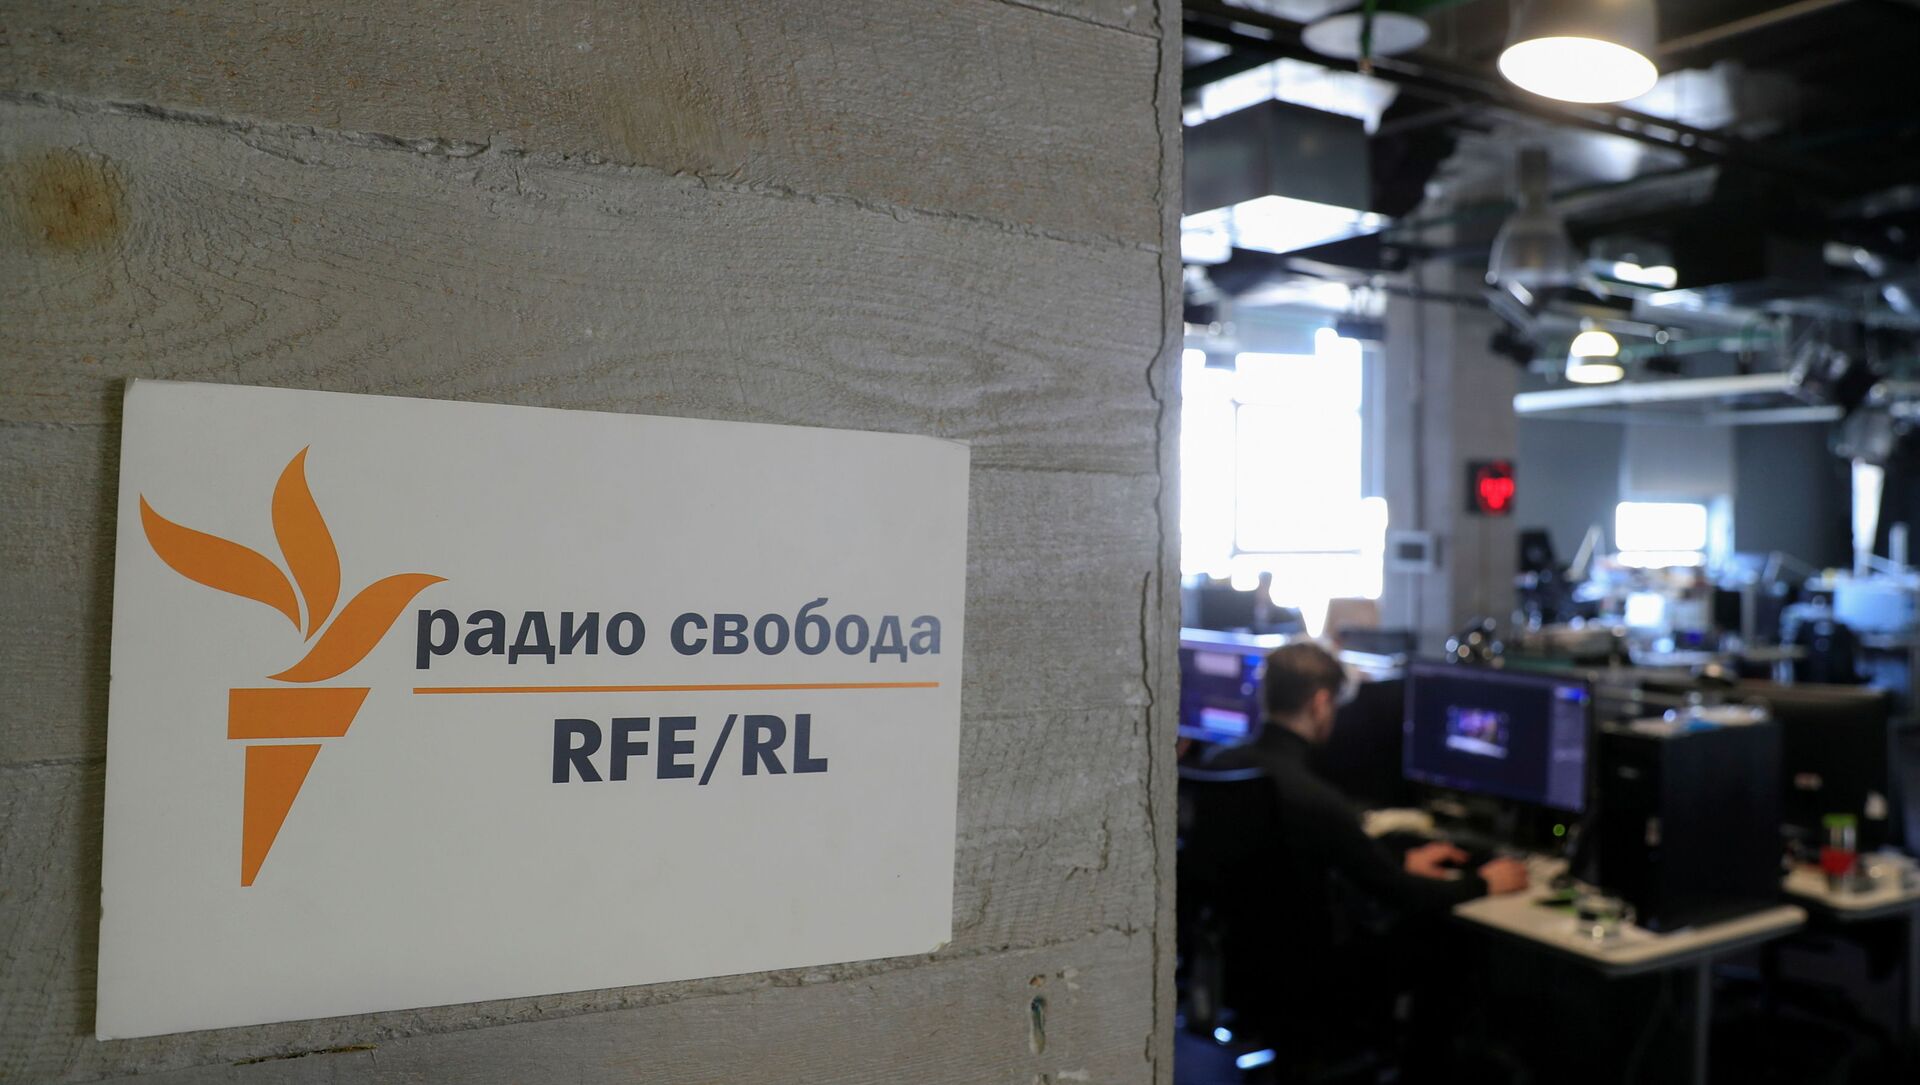 A view shows the newsroom of Radio Free Europe/Radio Liberty (RFE/RL) broadcaster in Moscow, Russia April 6, 2021. Picture taken April 6, 2021. - Sputnik International, 1920, 14.05.2021